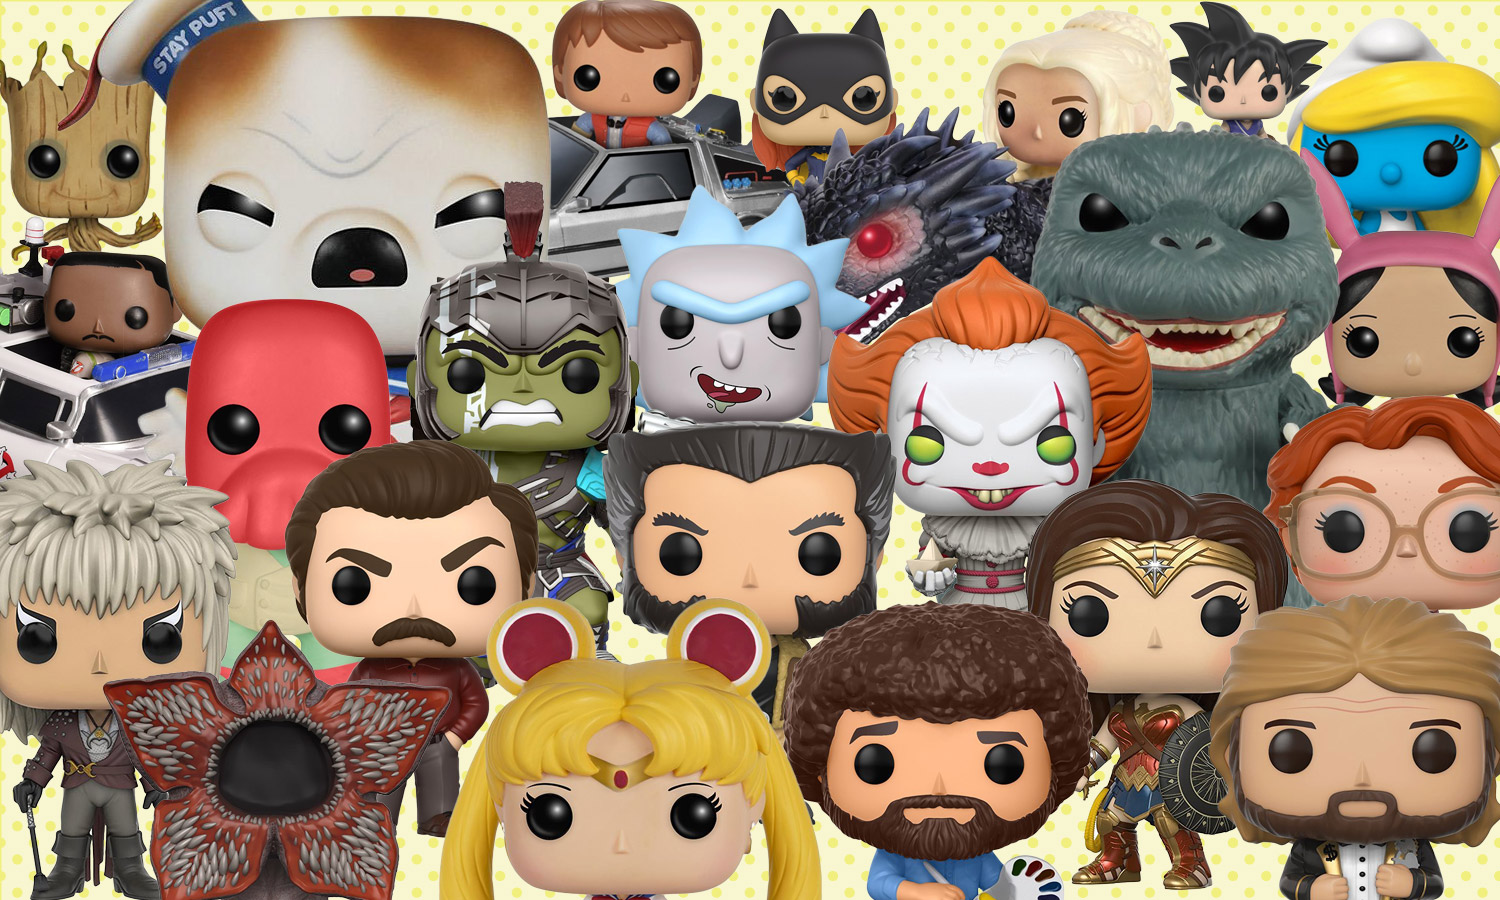 best-funko-pop-vinyls-33-figures-to-add-to-your-collection-tom-s-guide